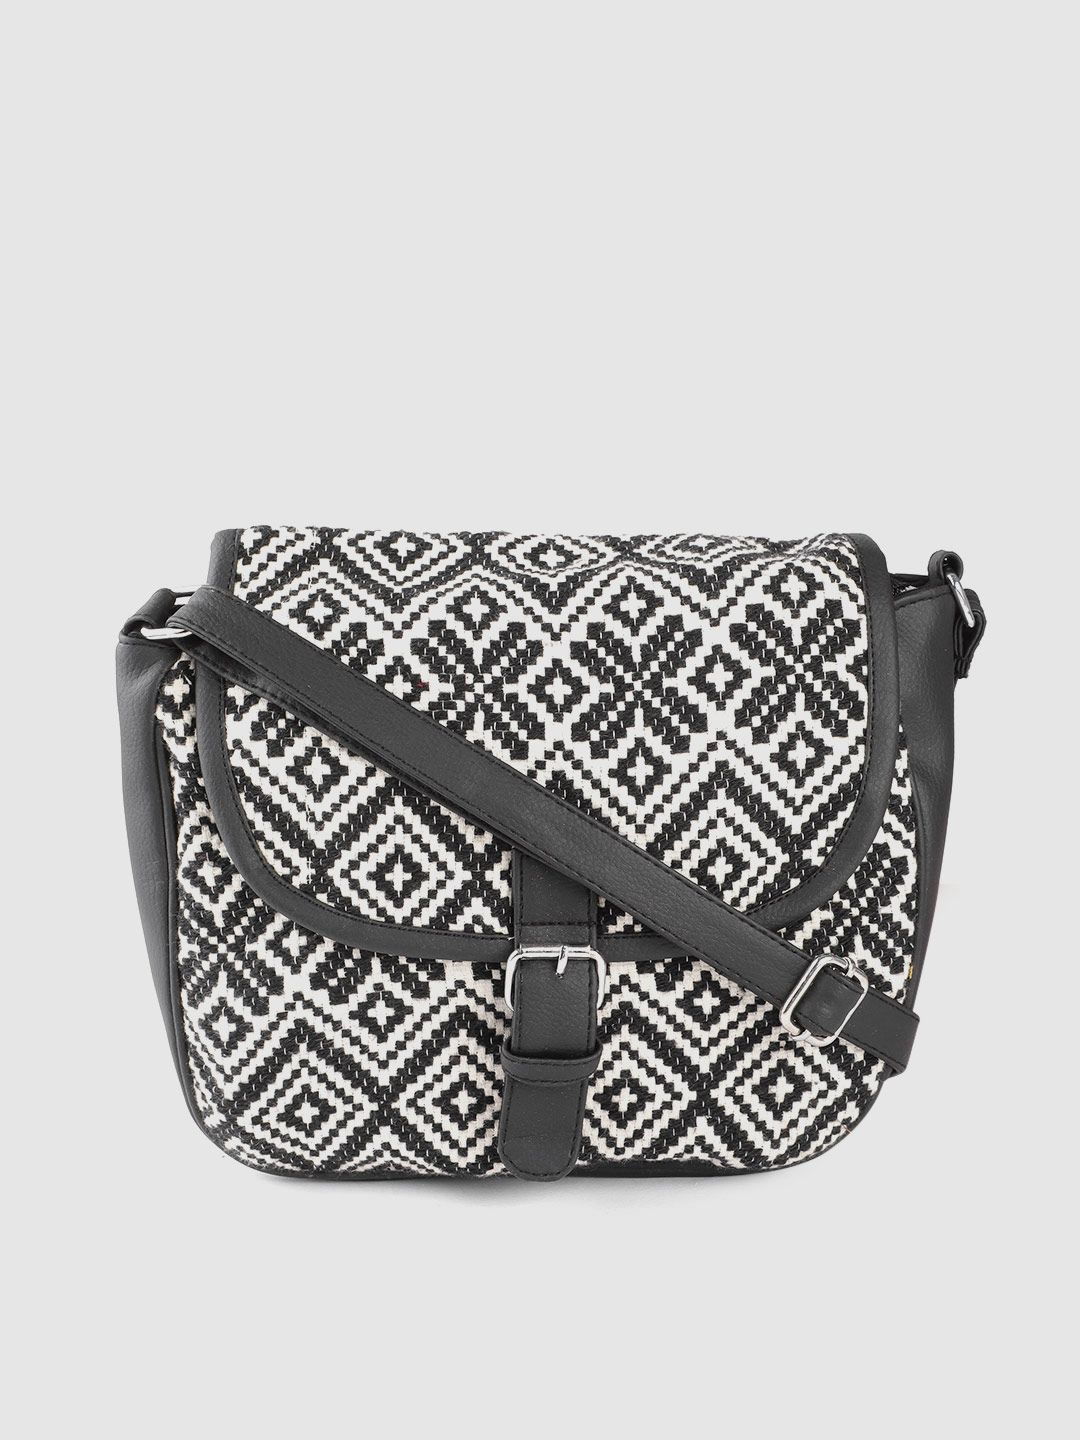 Anouk Black & Off-White Geometric Jacquard Woven Design Structured Sling Bag Price in India